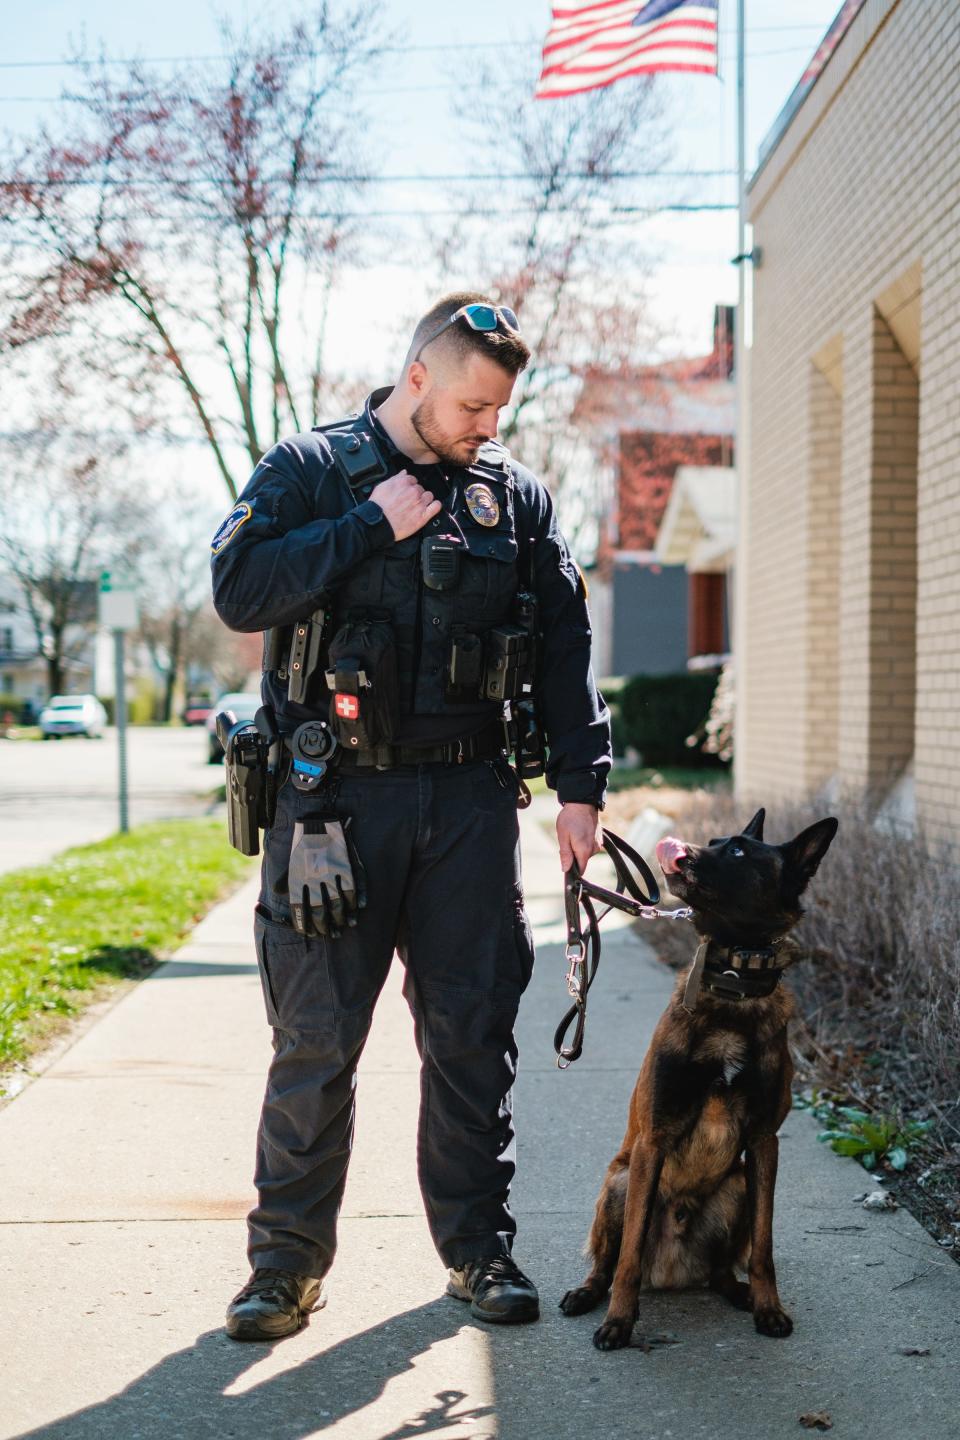 New Philadelphia Police Officer Brad Geist has been partnered with Cooper, a 4-year-old Belgian Malinois, for two years. Cooper is a multipurpose dog, and was not trained to detect marijuana.